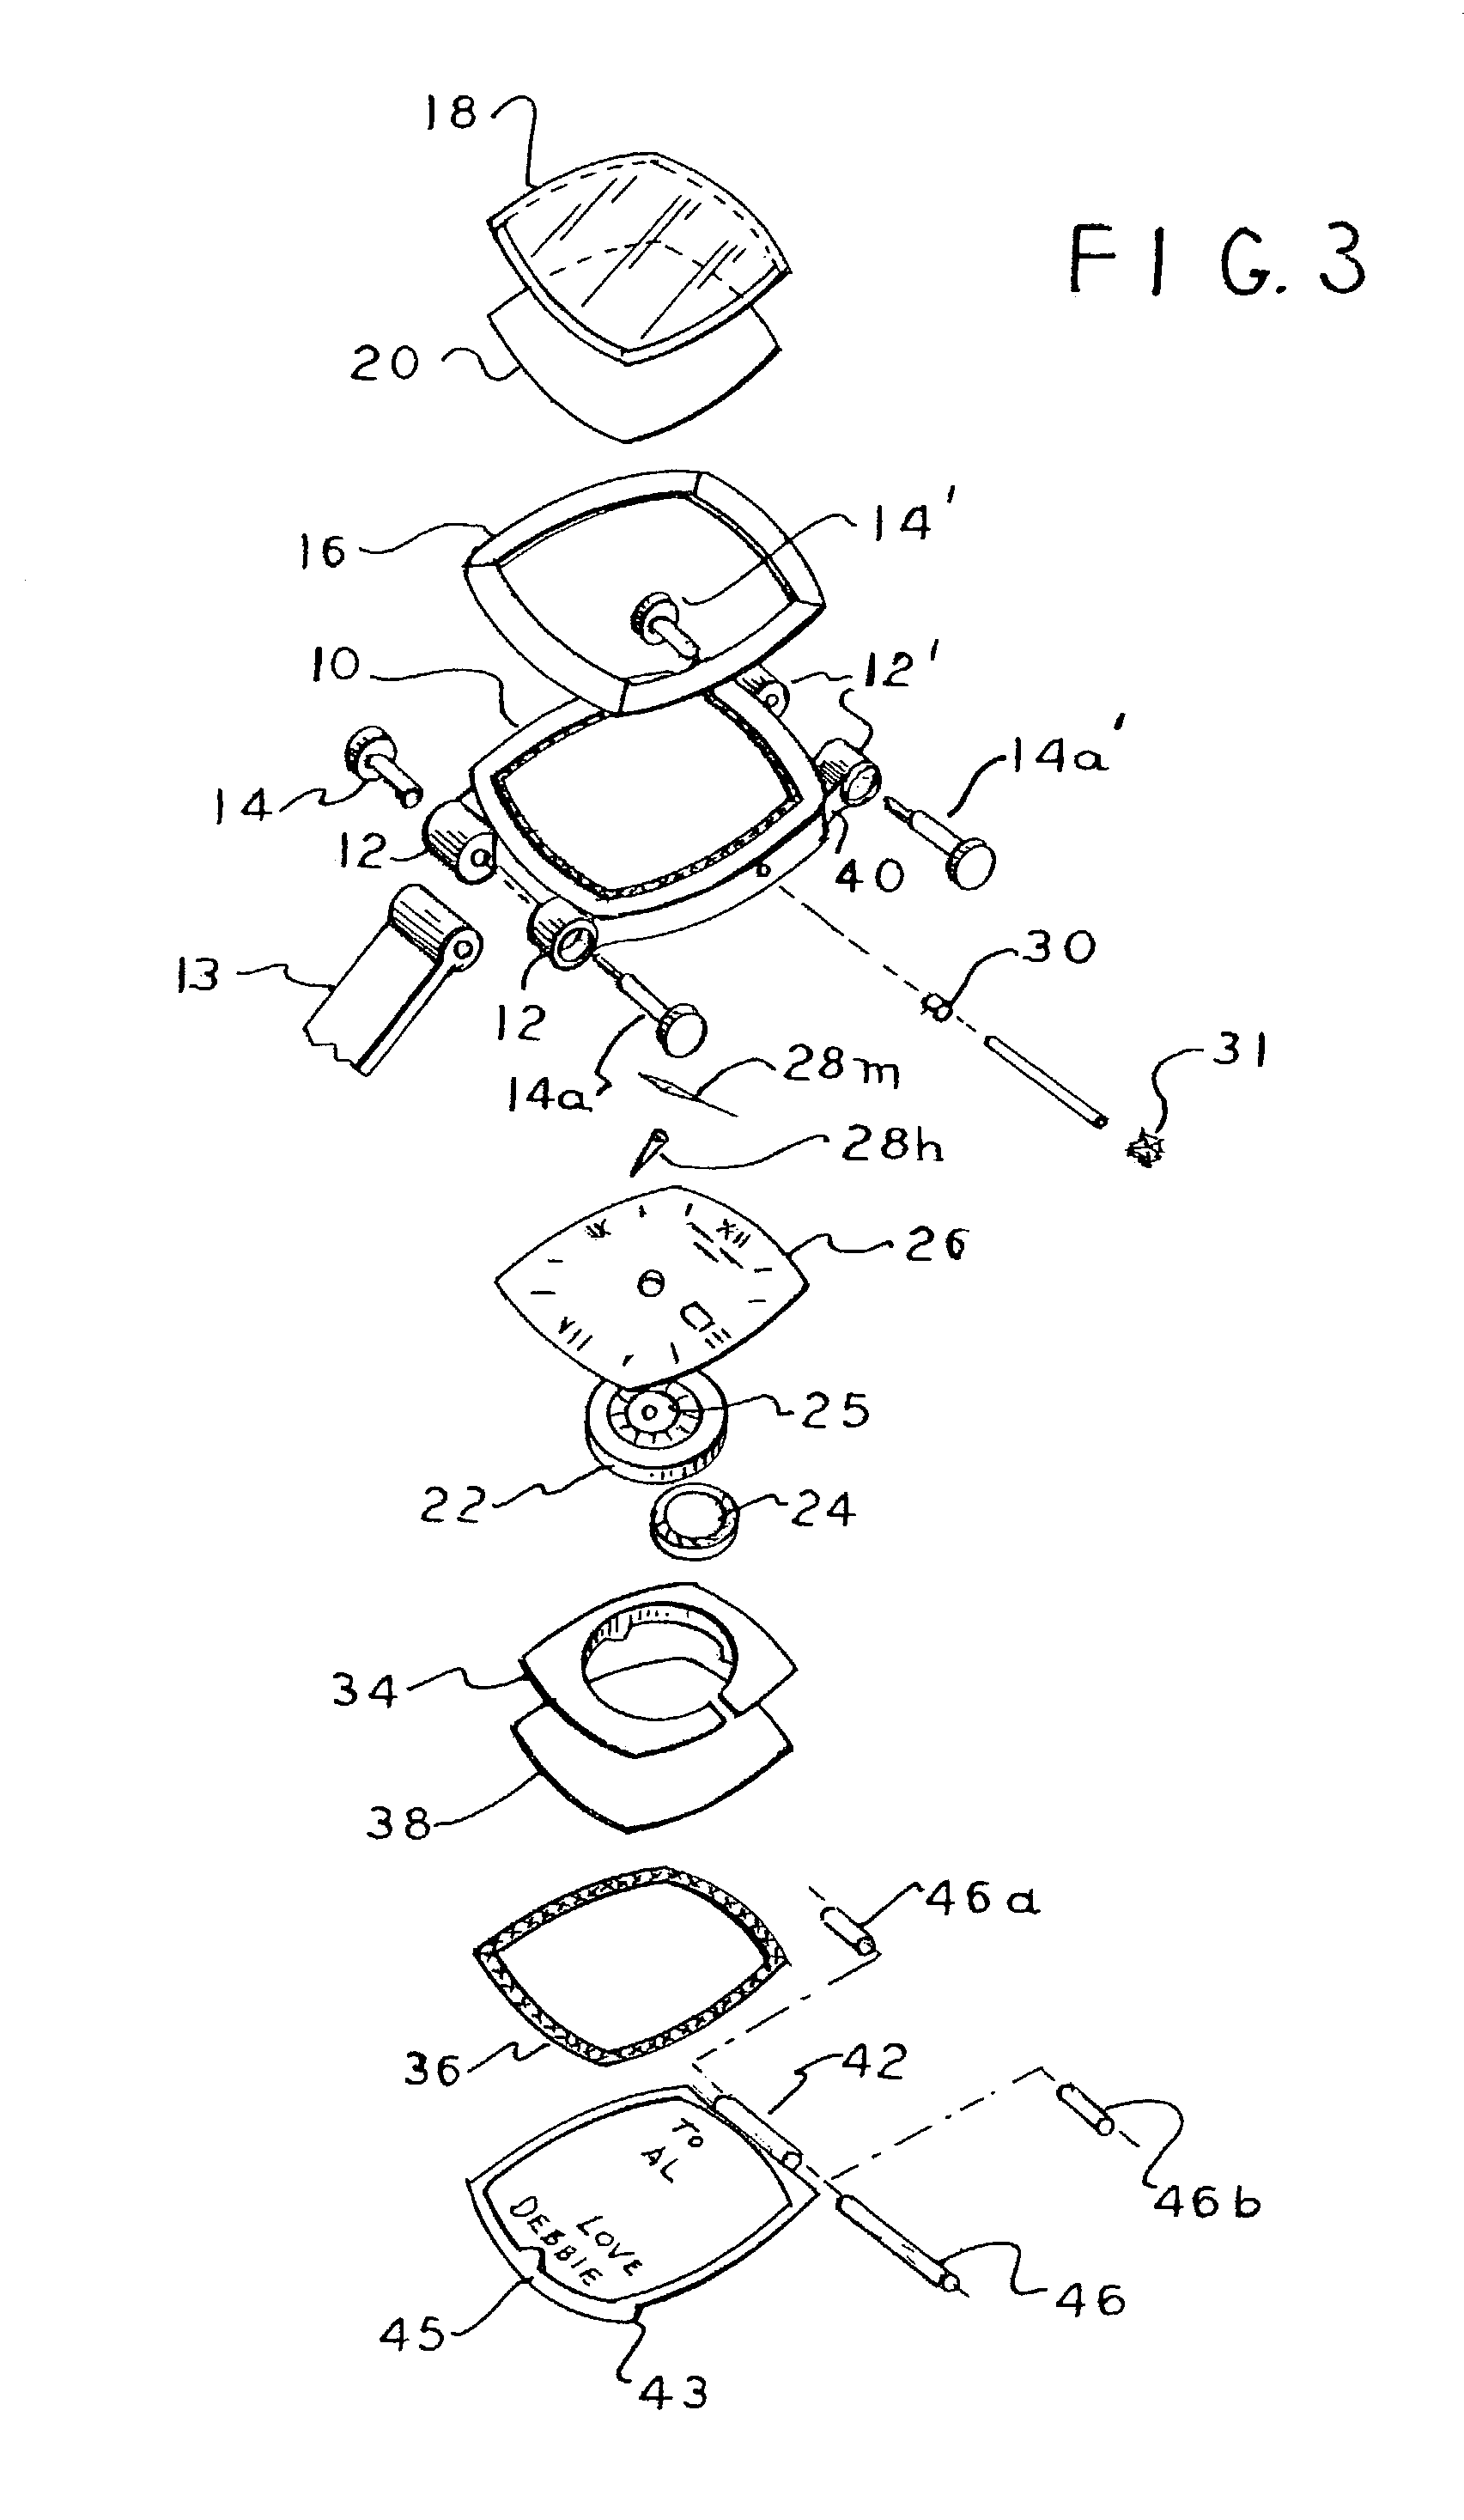 Apparatus for setting gems and providing hidden compartments in a timepiece